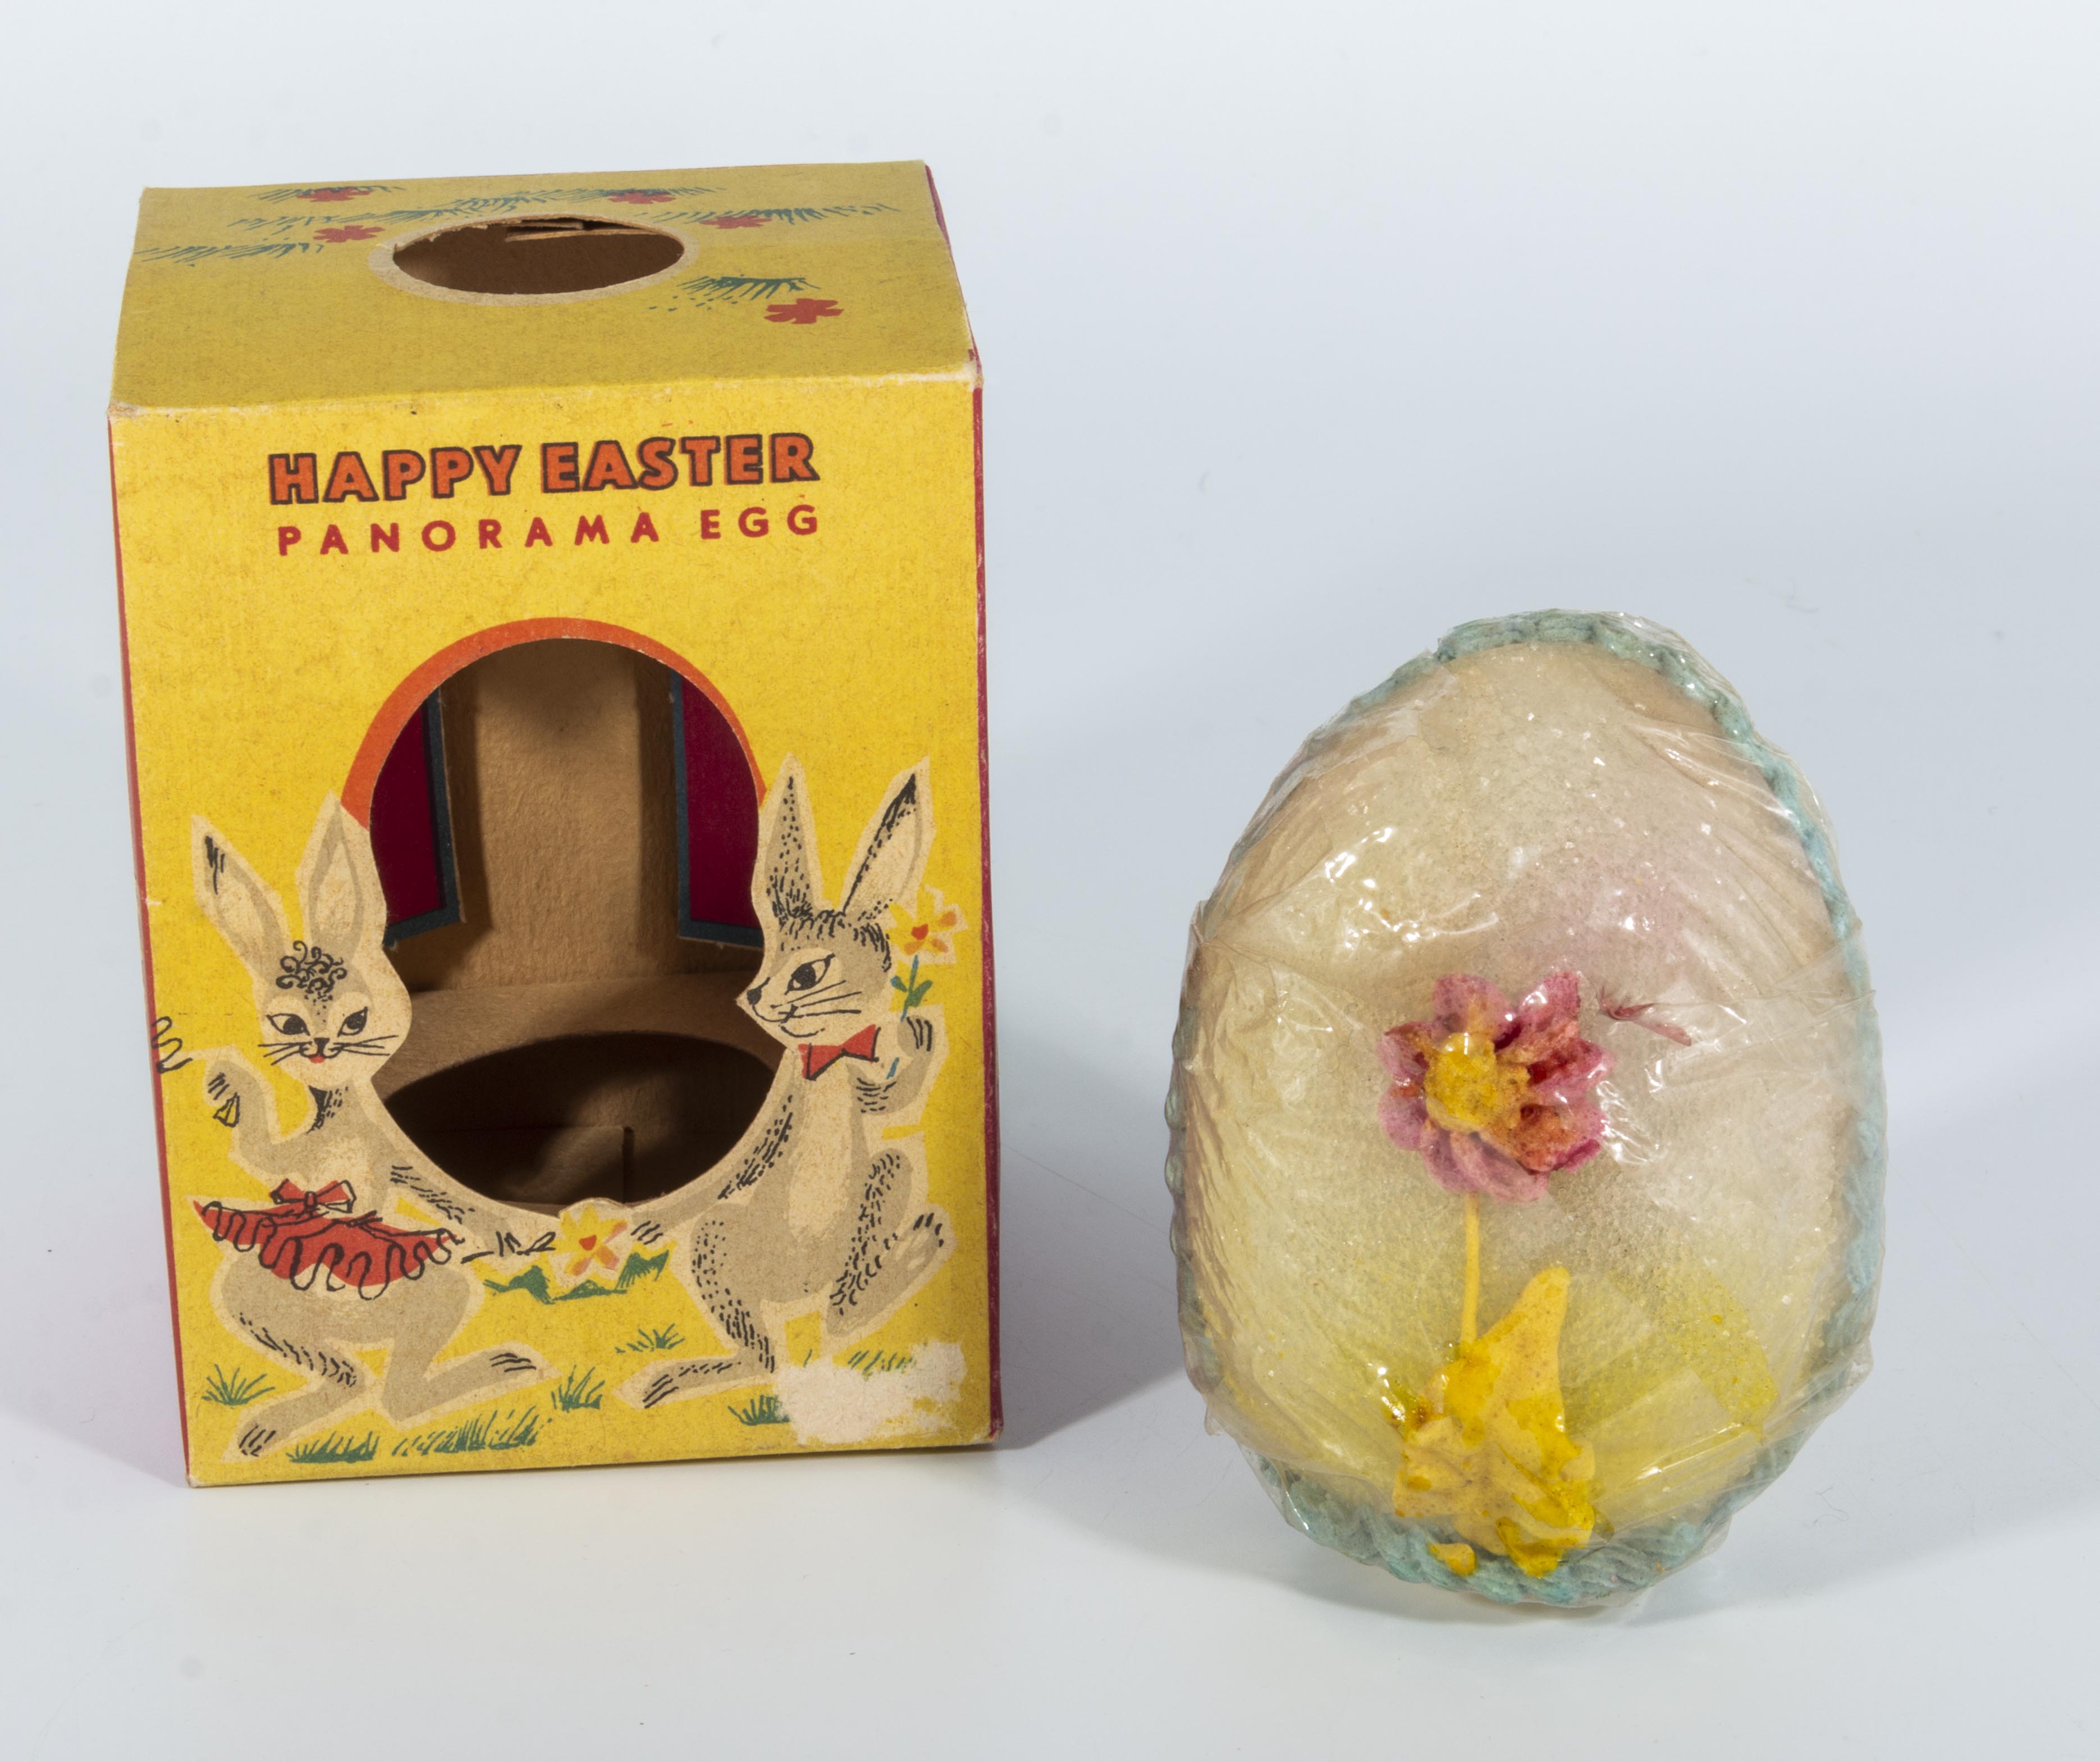 A vintage Happy Easter panoramic egg